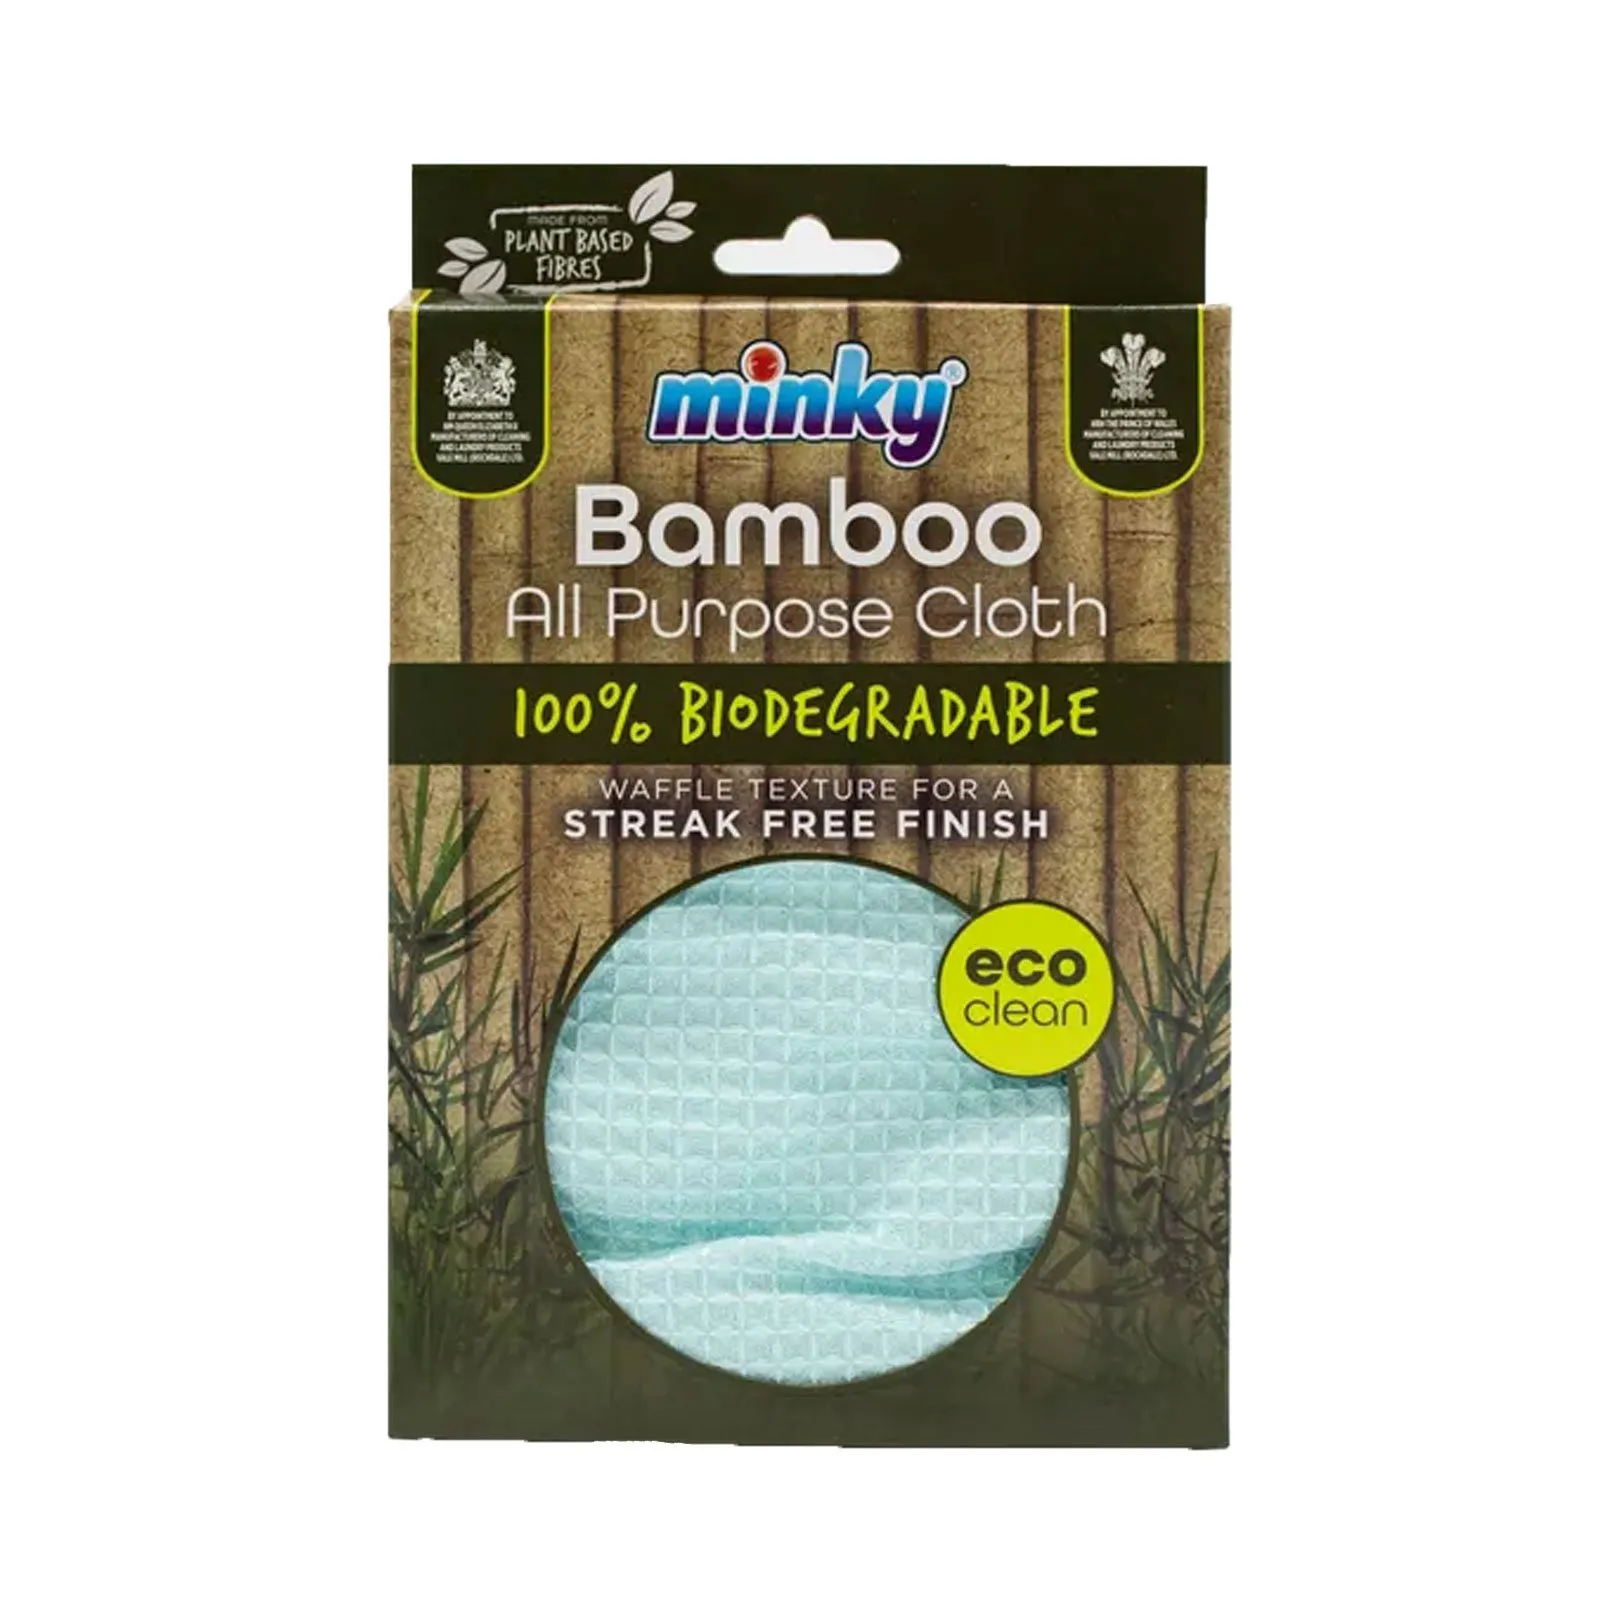 Minky Bamboo All Purpose Cloth 100% Biodegradable